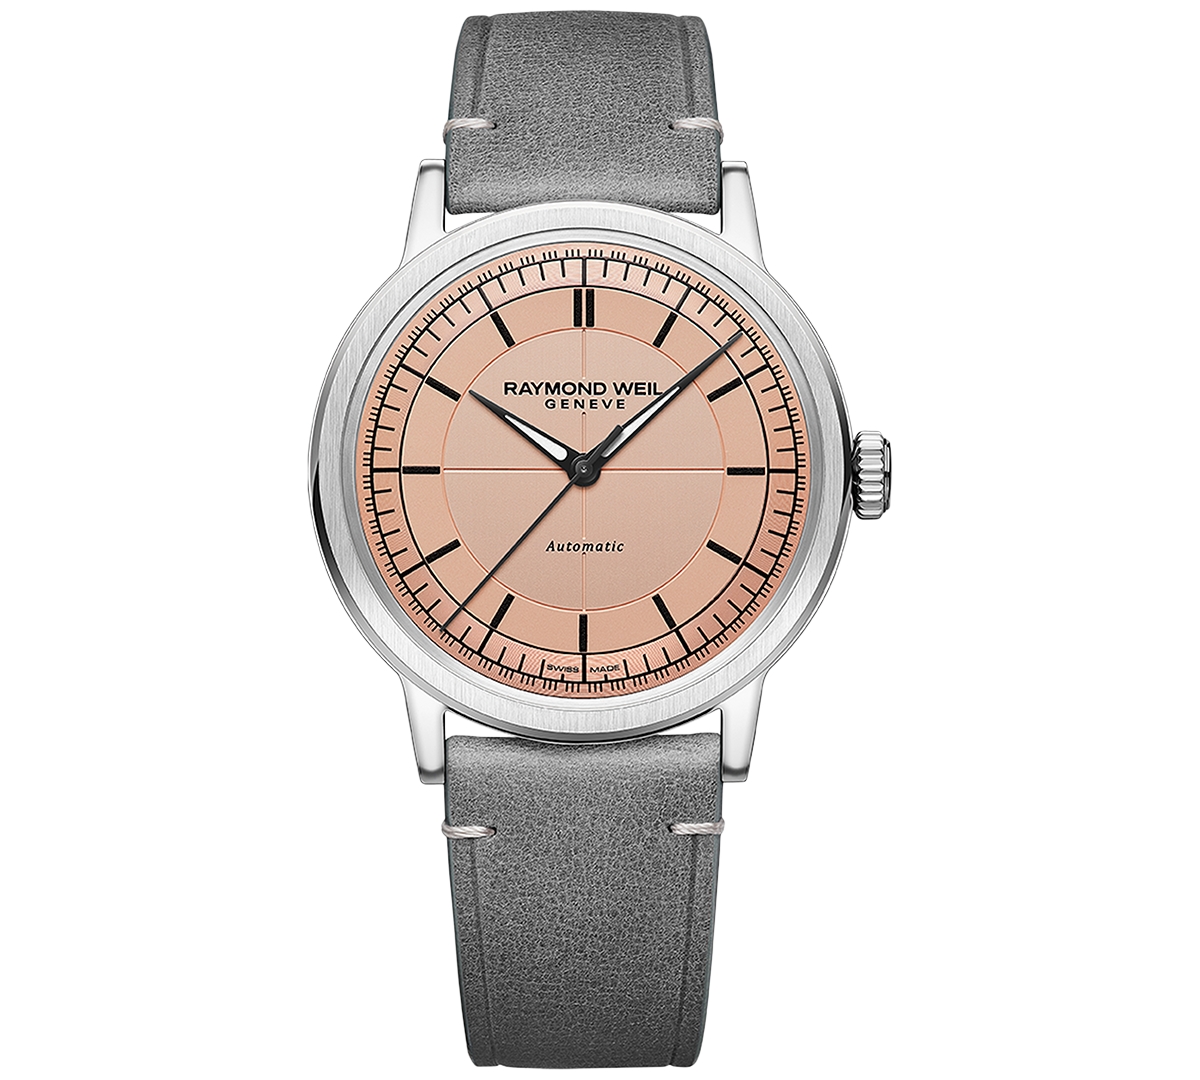 Men's Swiss Automatic Millesime Gray Leather Strap Watch 40mm